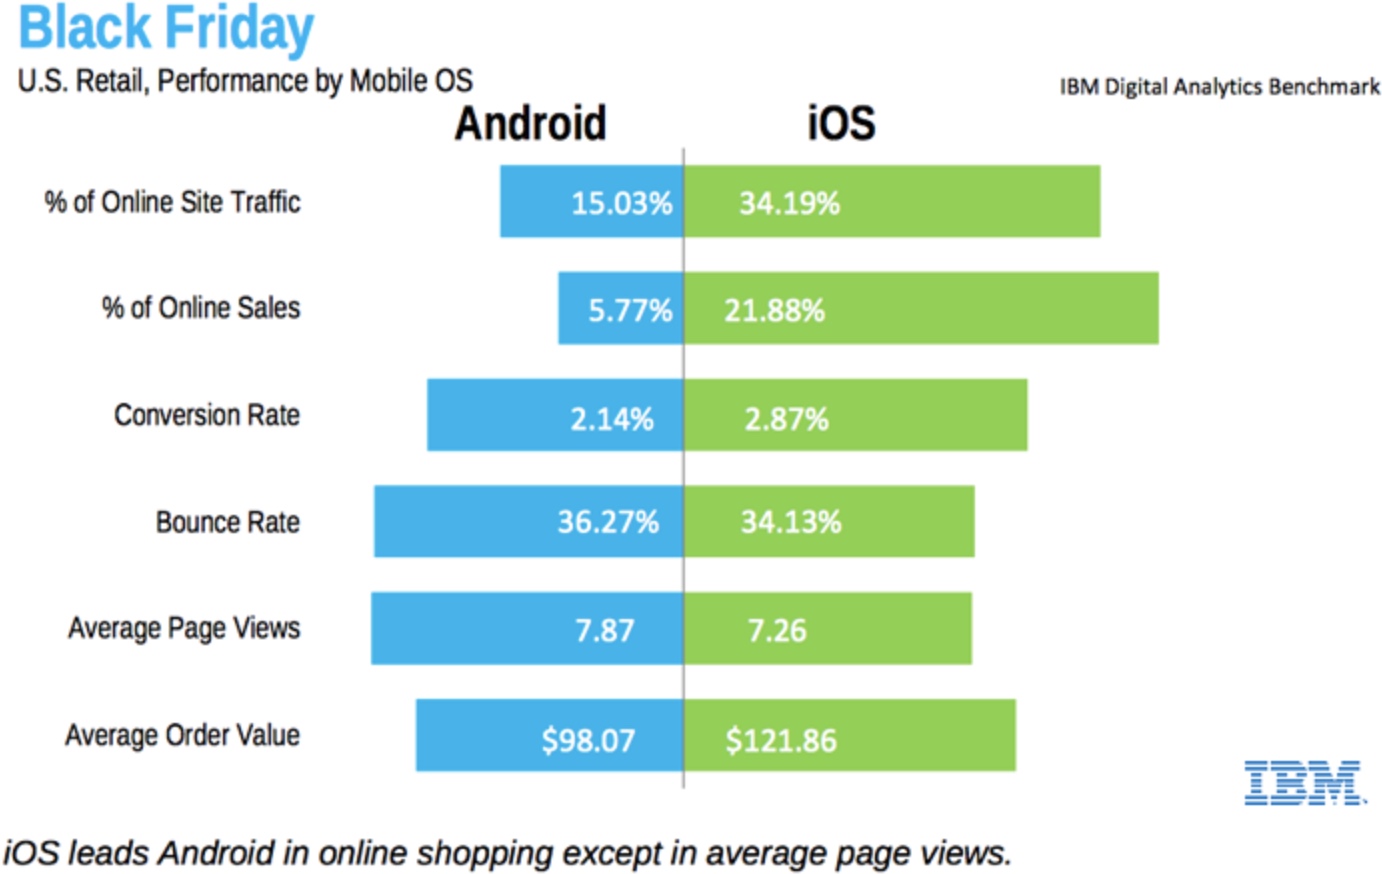 When it comes to conversion, iOS is still way ahead of Android